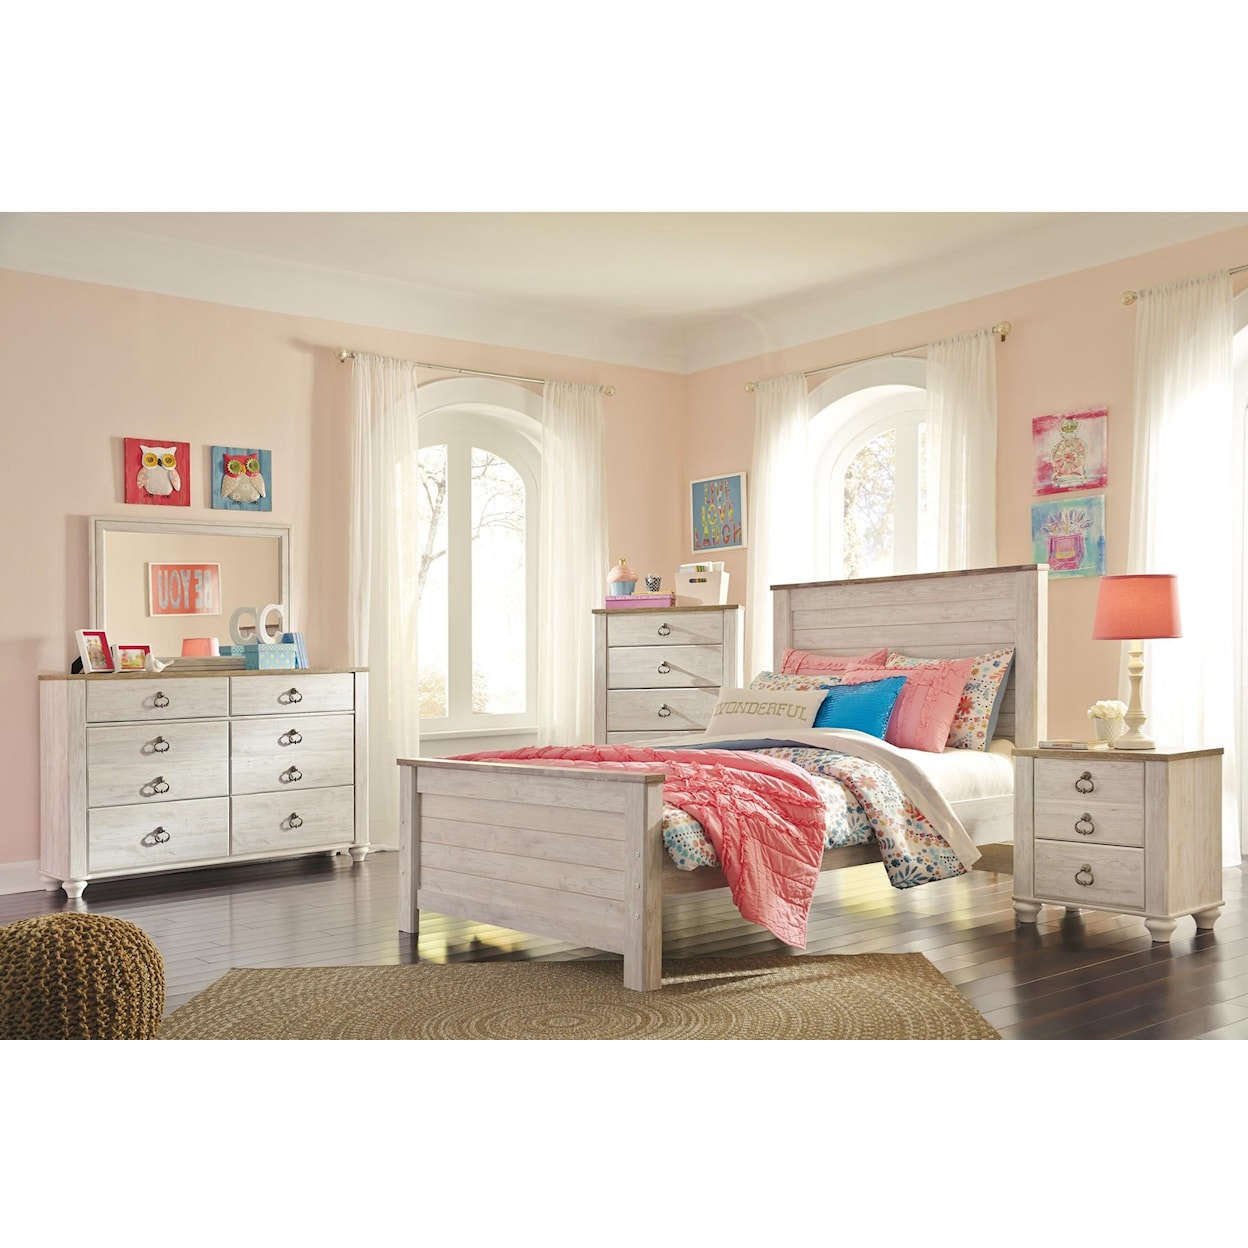 Signature Design by Ashley Willowton Twin 5 Piece Bedroom Group